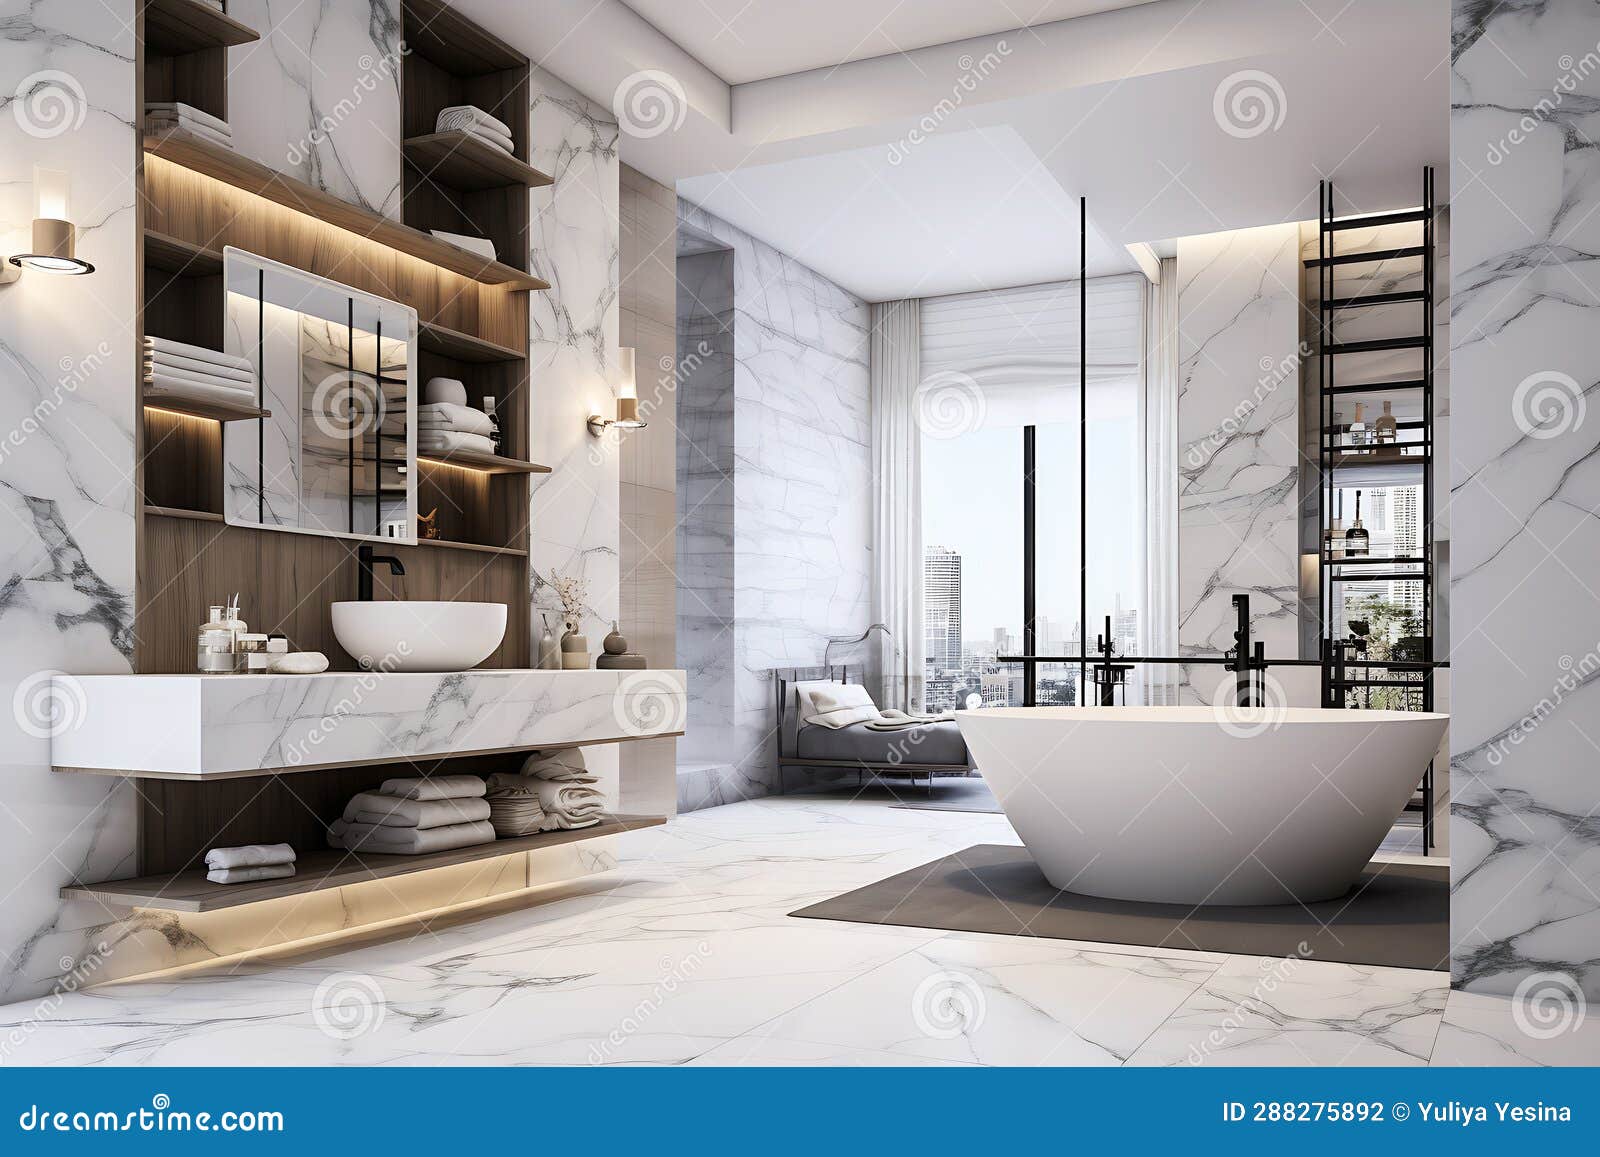 Luxurious Interior of a White Bathroom Connected To the Bedroom. Stock ...